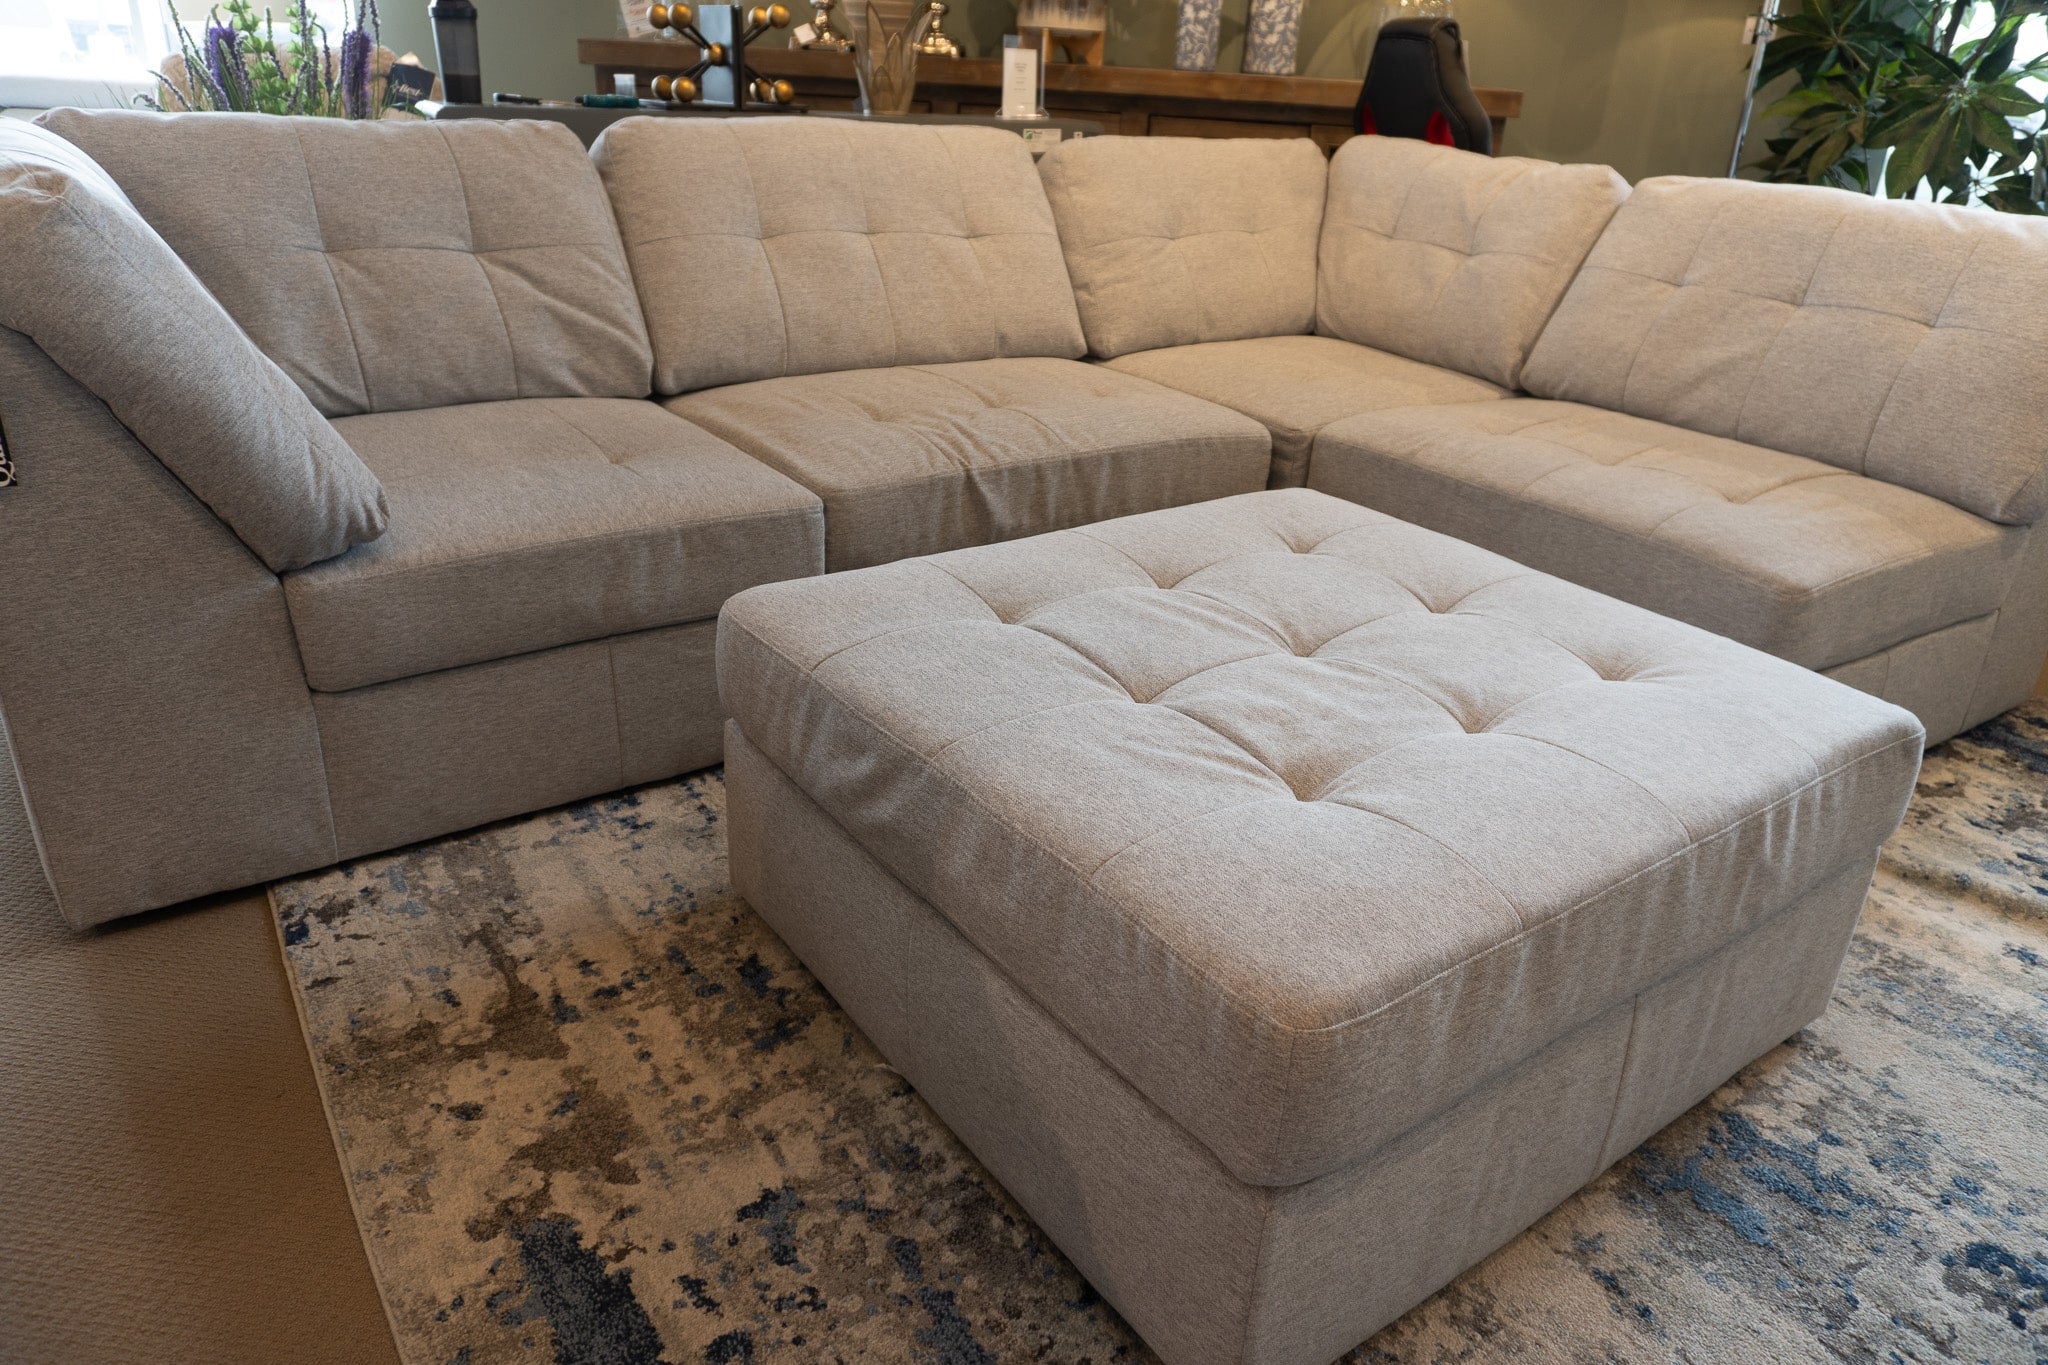 Our Top Selling Sectional!